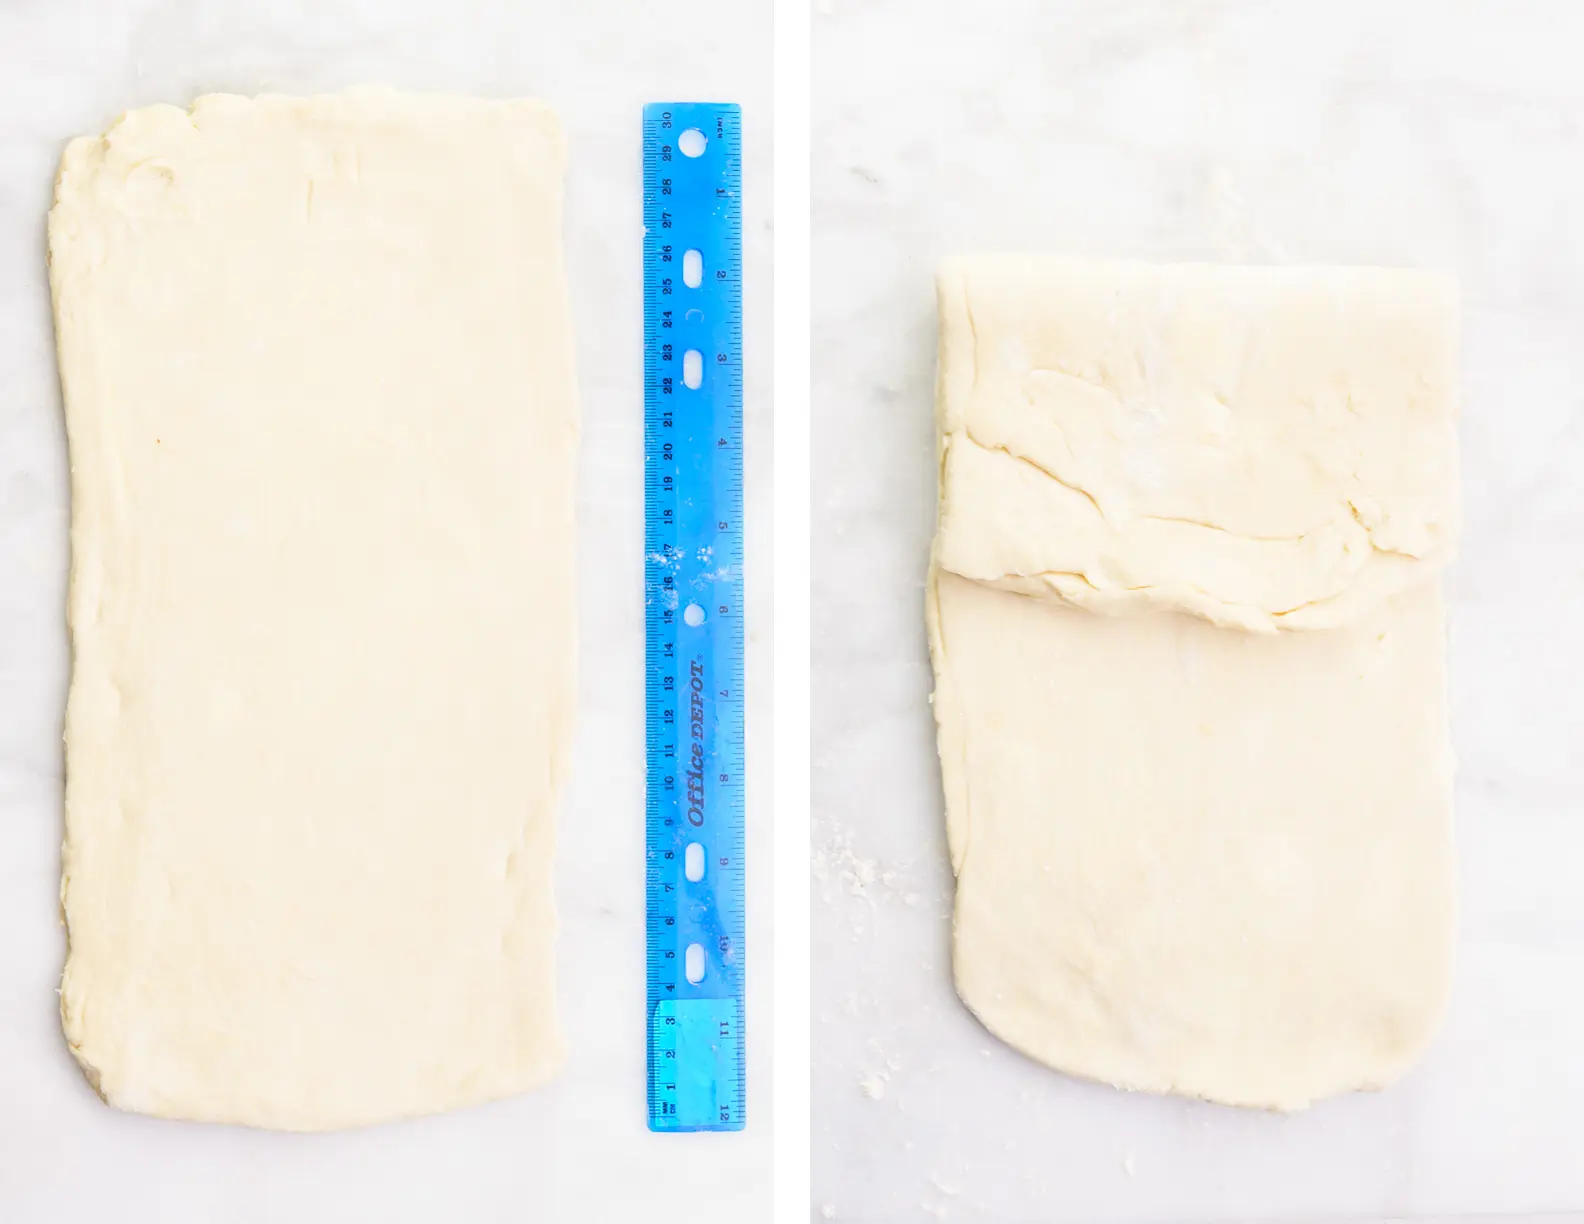 A collage of two images shows pastry dough rolled out alongside a ruler on the left. The image on the right shows the top part of that pastry dough folded over about a third of the way.